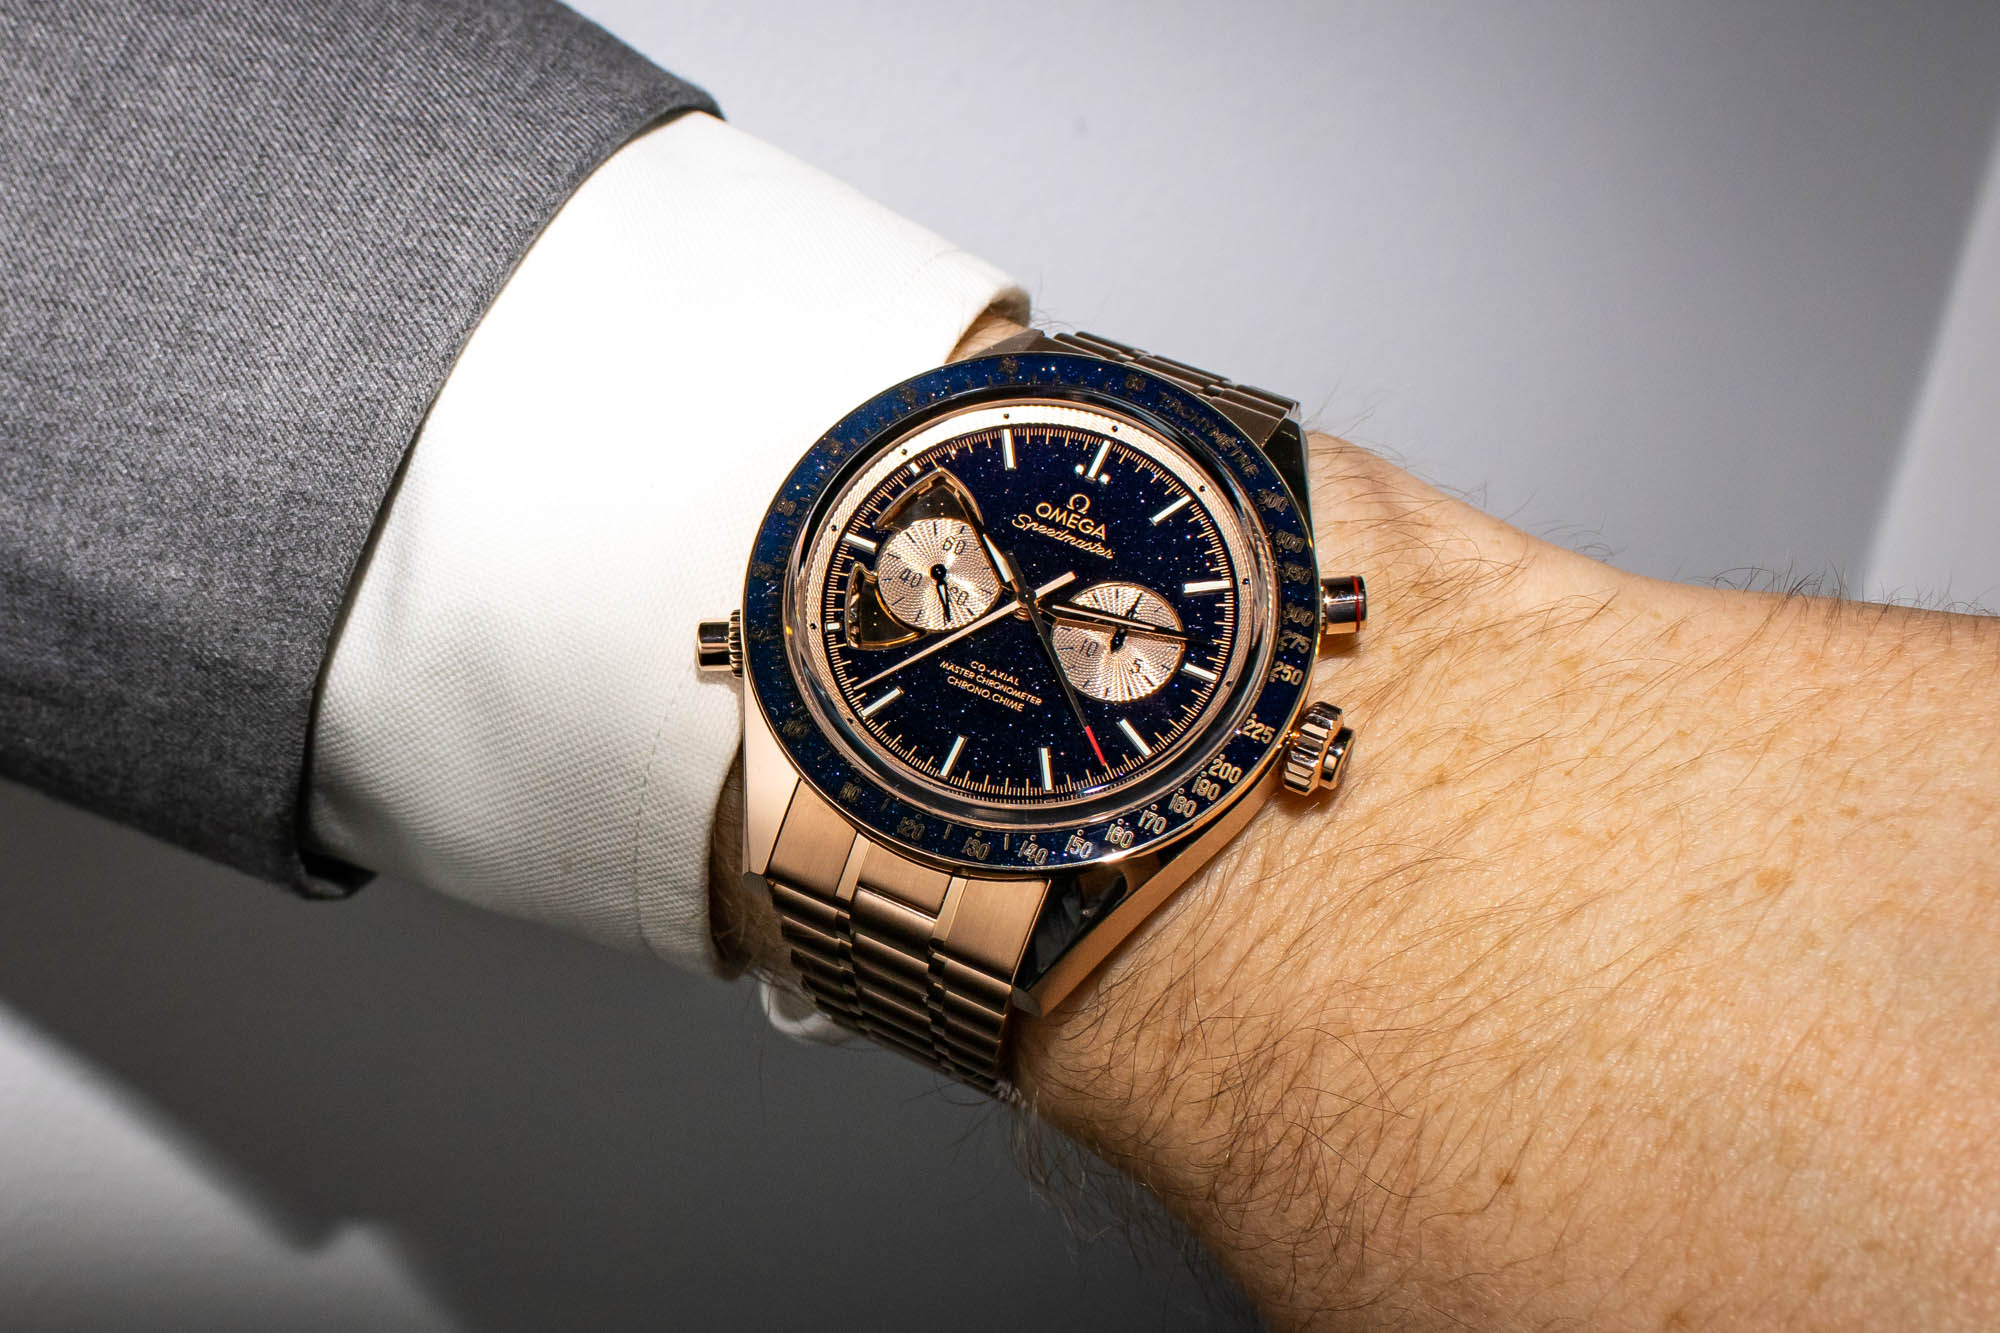 Introducing The Omega Speedmaster Chrono Chime